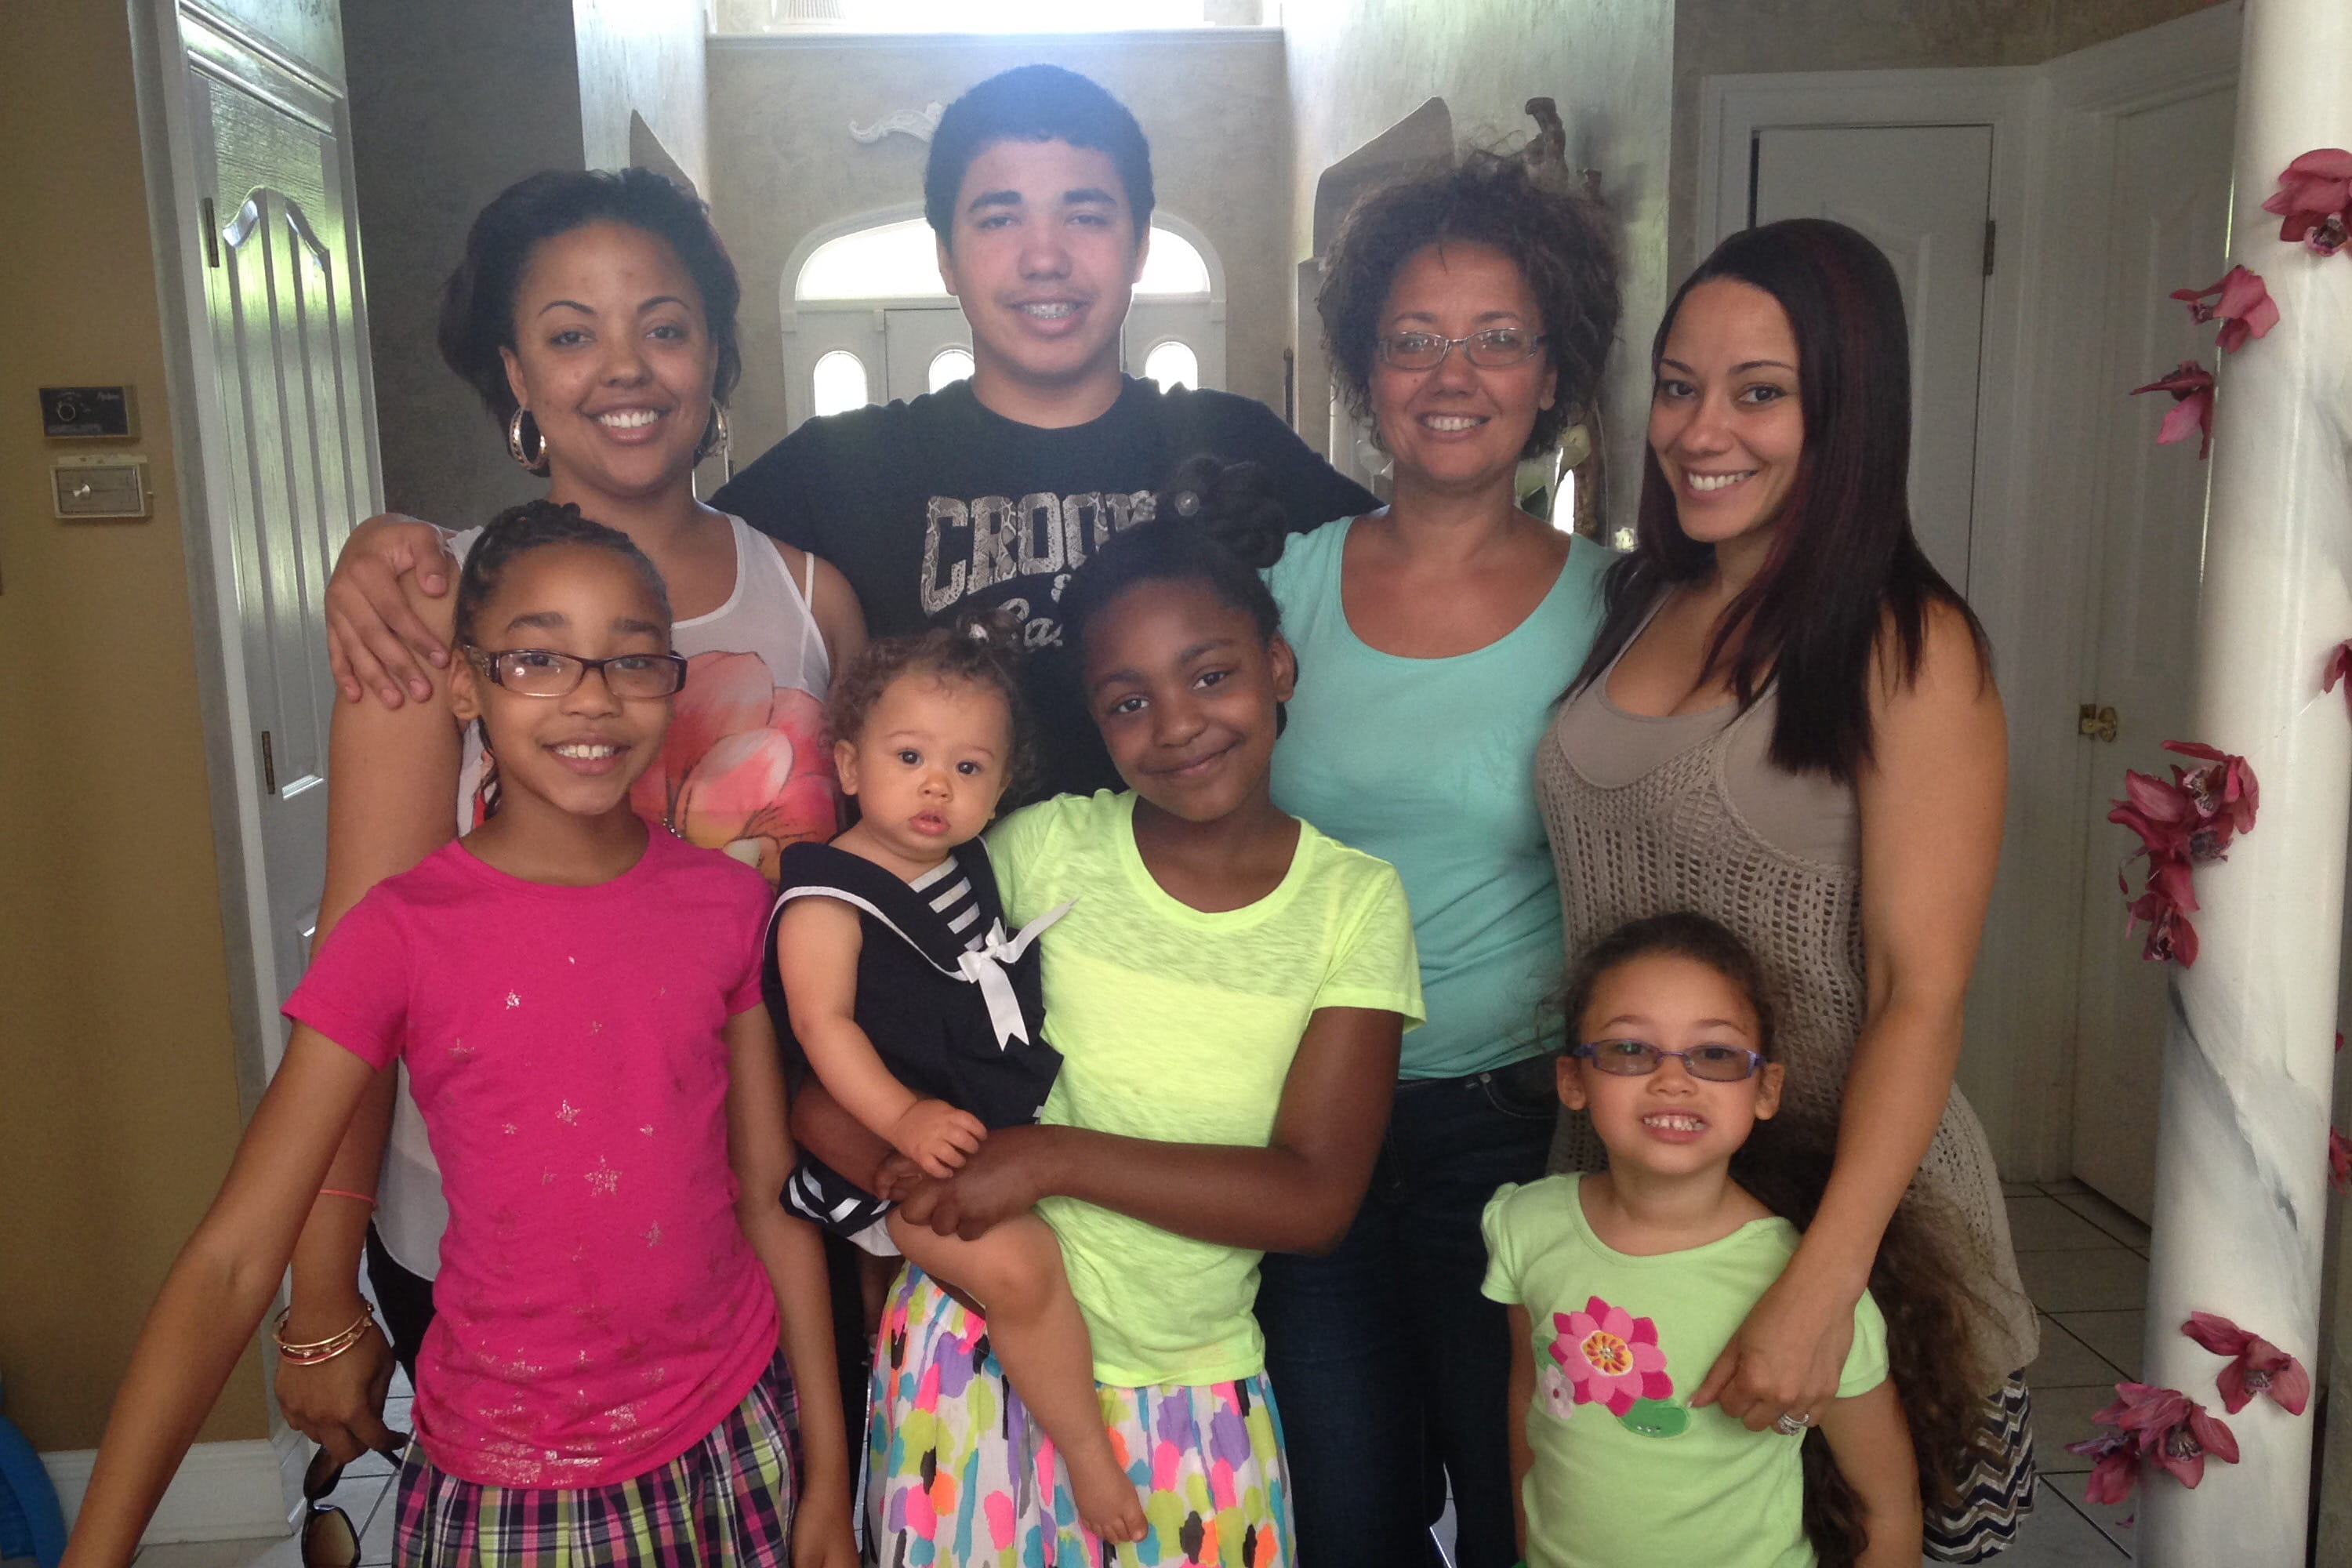 Marcelaine Reneau and her family posing for a portrait inside on Mother's Day in 2015.